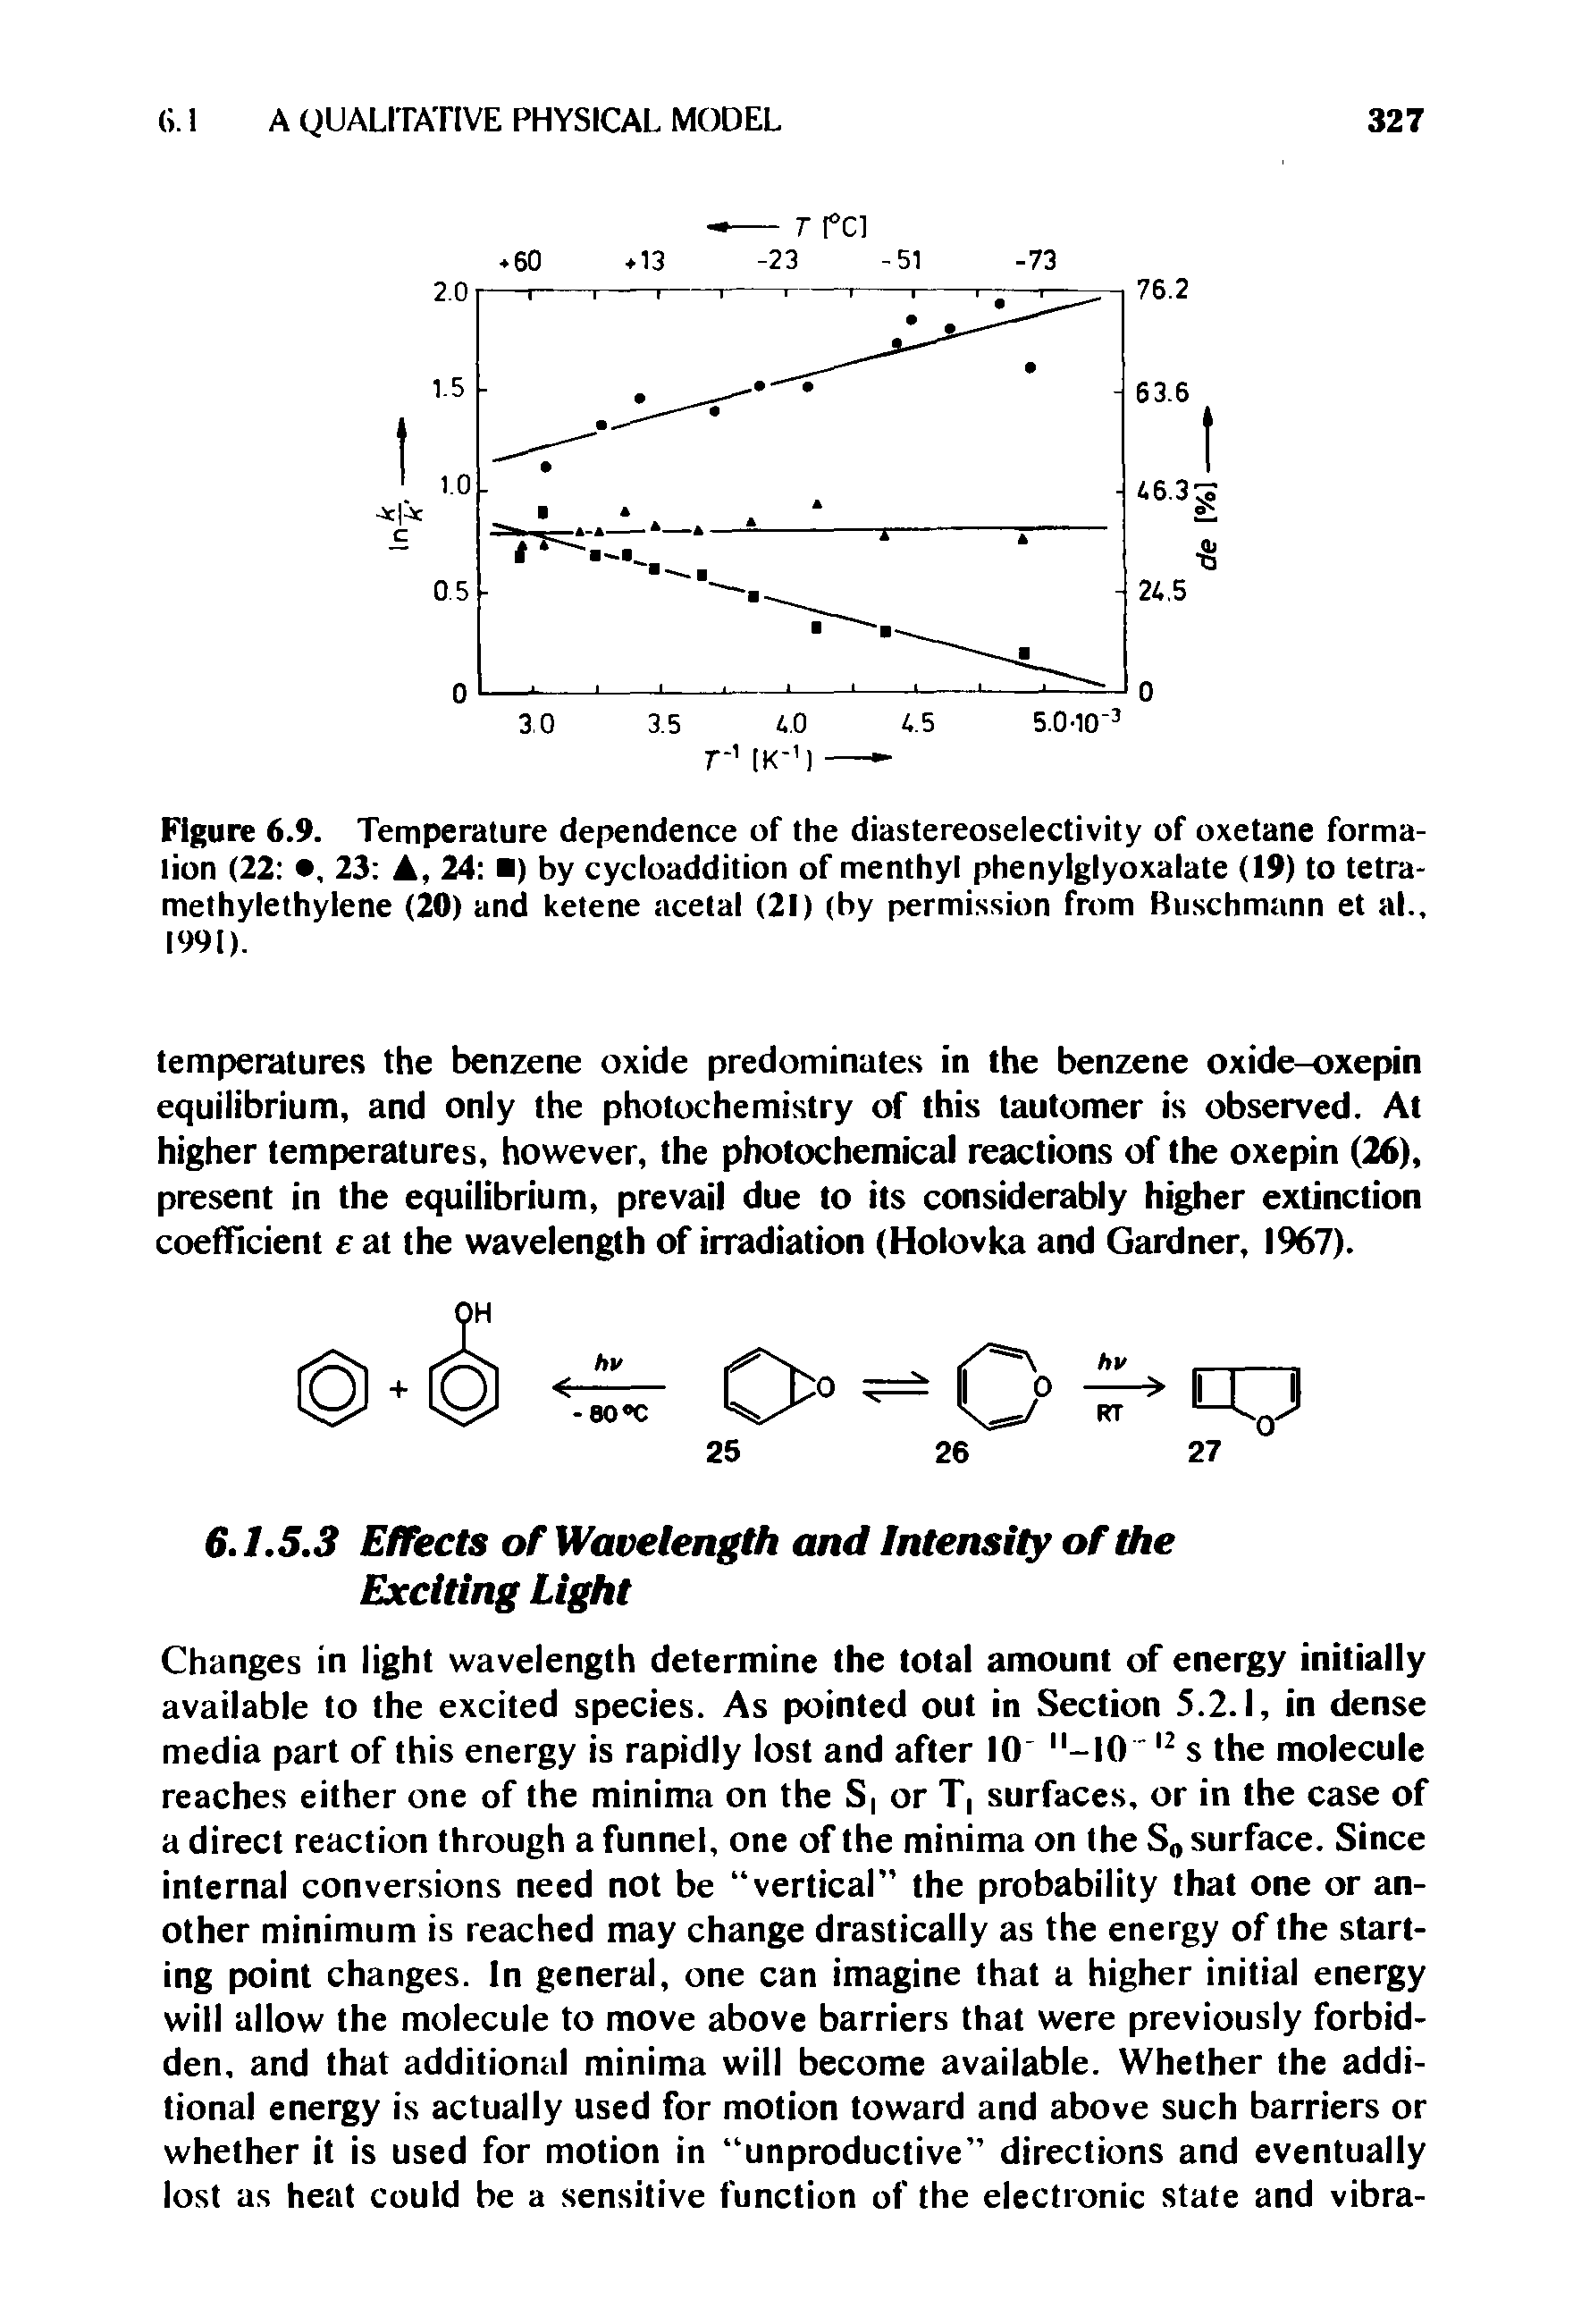 Figure 6.9. Temperature dependence of the diastereoselectivity of oxetane formation (22 , 23 A, 24 ) by cycloaddition of menthyl phenylglyoxalate (19) to tetra-methylethylene (20) and ketene acetal (21) (by permission from Biischmann et al., 1991).